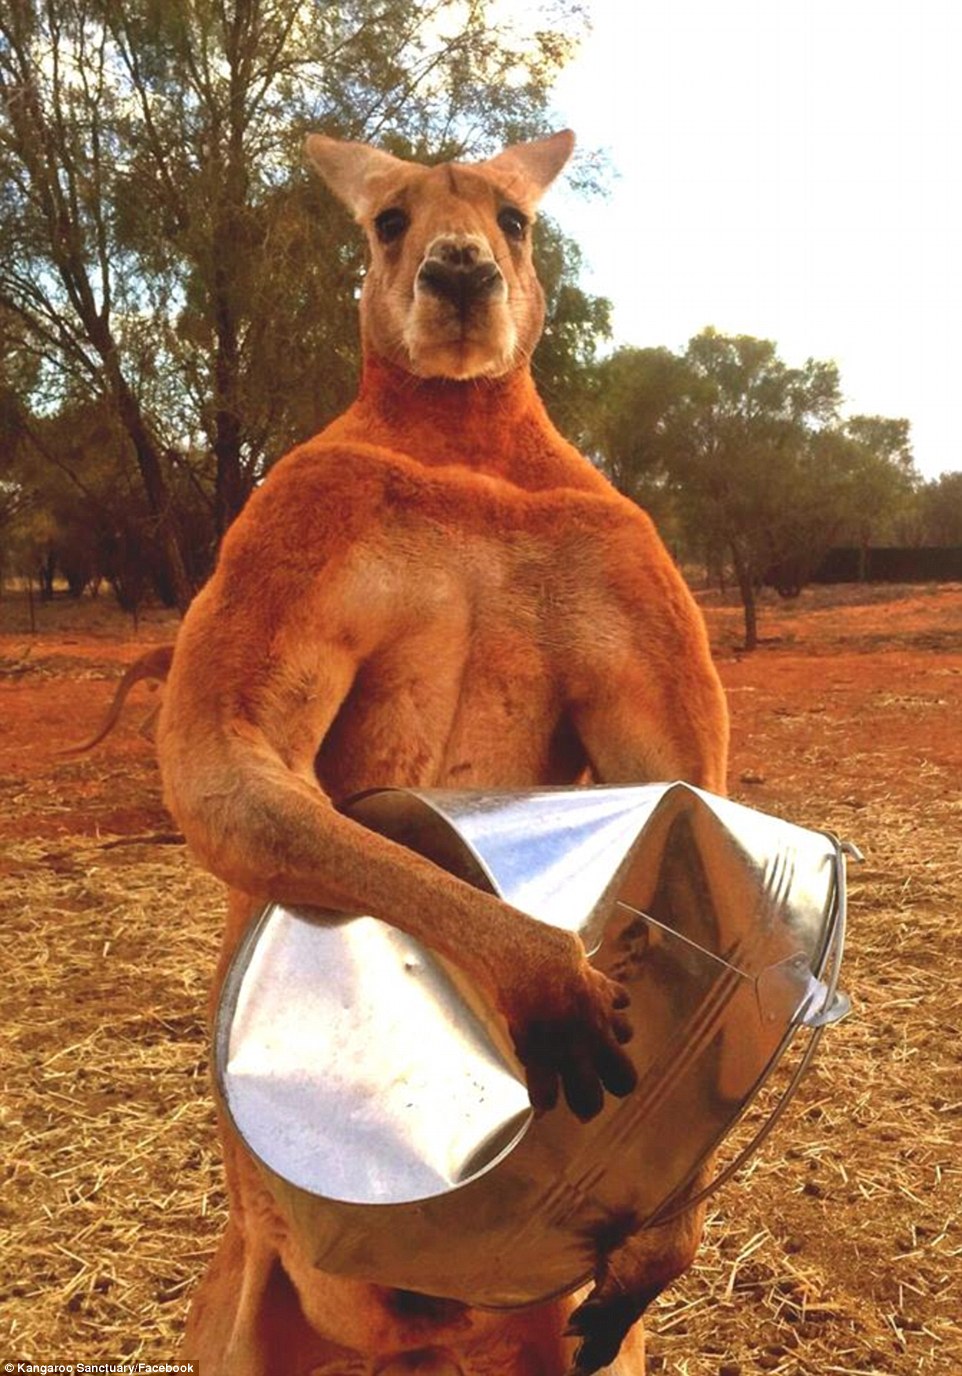 Roger lives in The Kangaroo Sanctuary Alice Springs in the Northern Territory and is seen here crushing a tin bucket